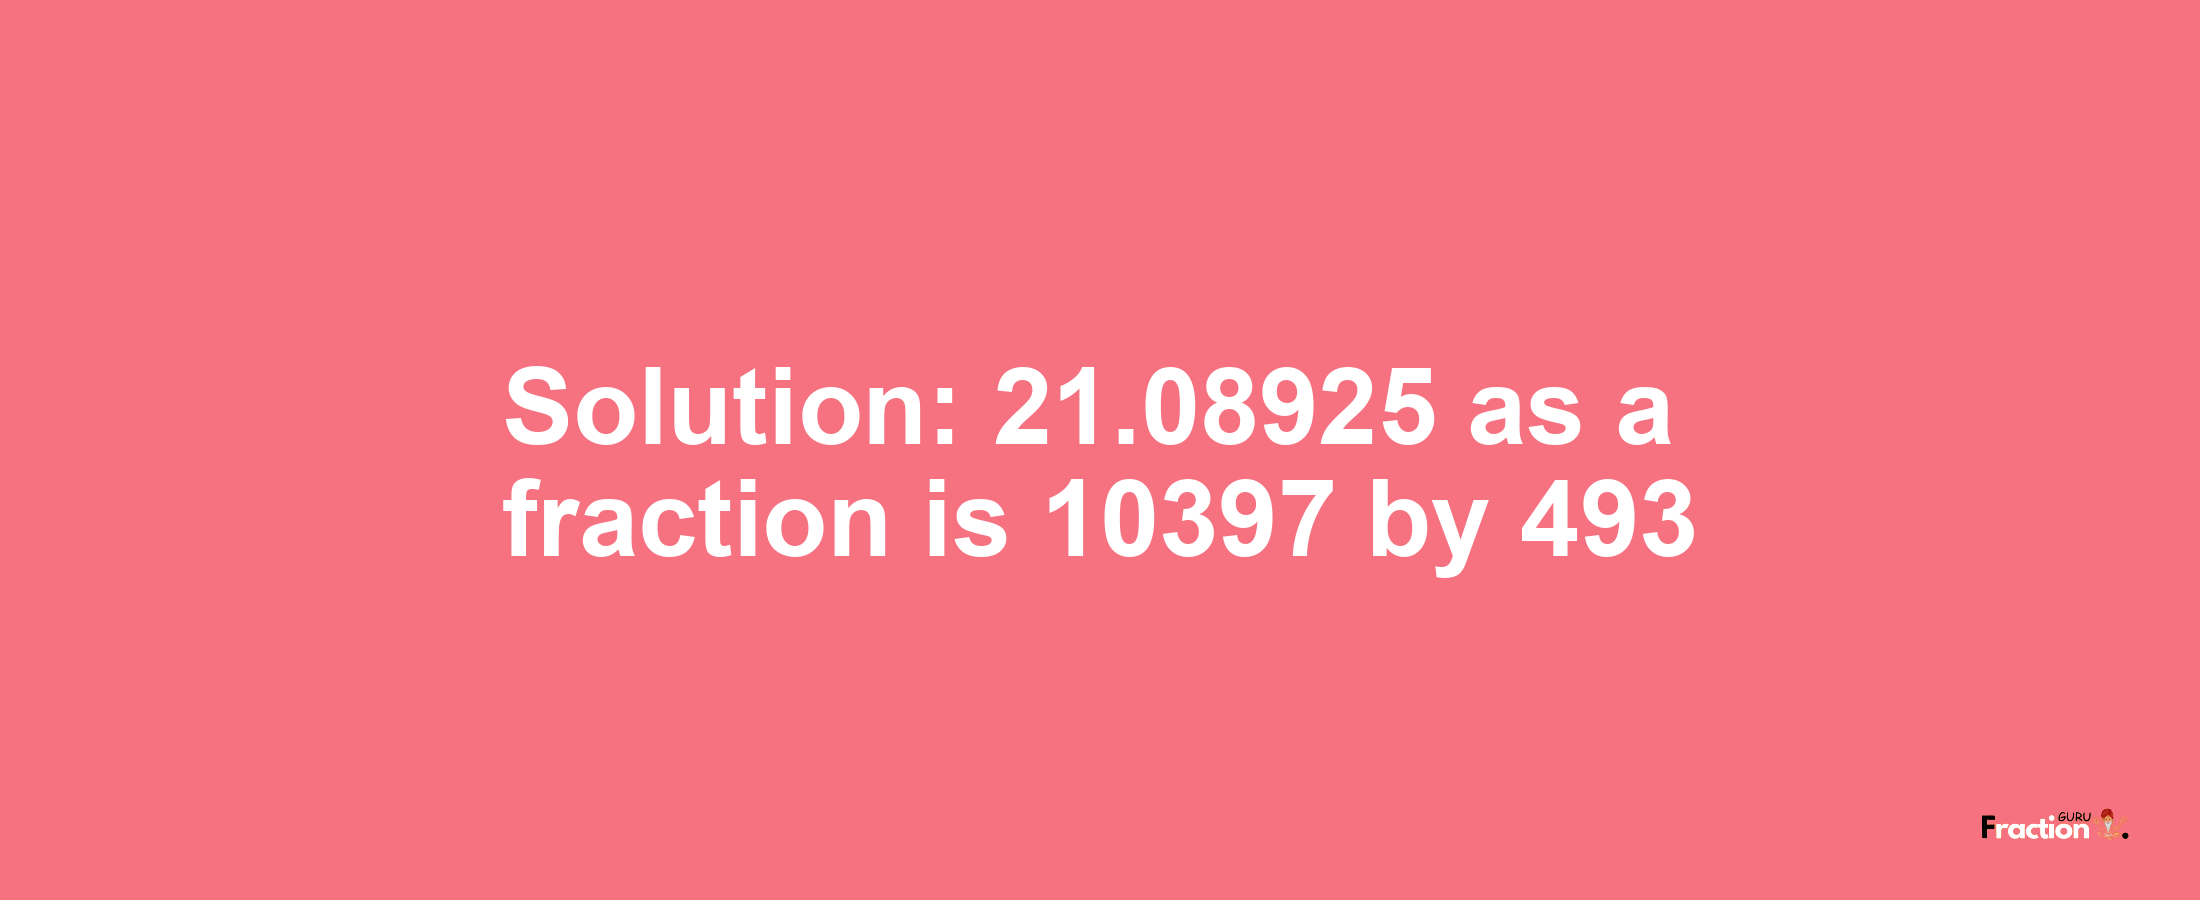 Solution:21.08925 as a fraction is 10397/493